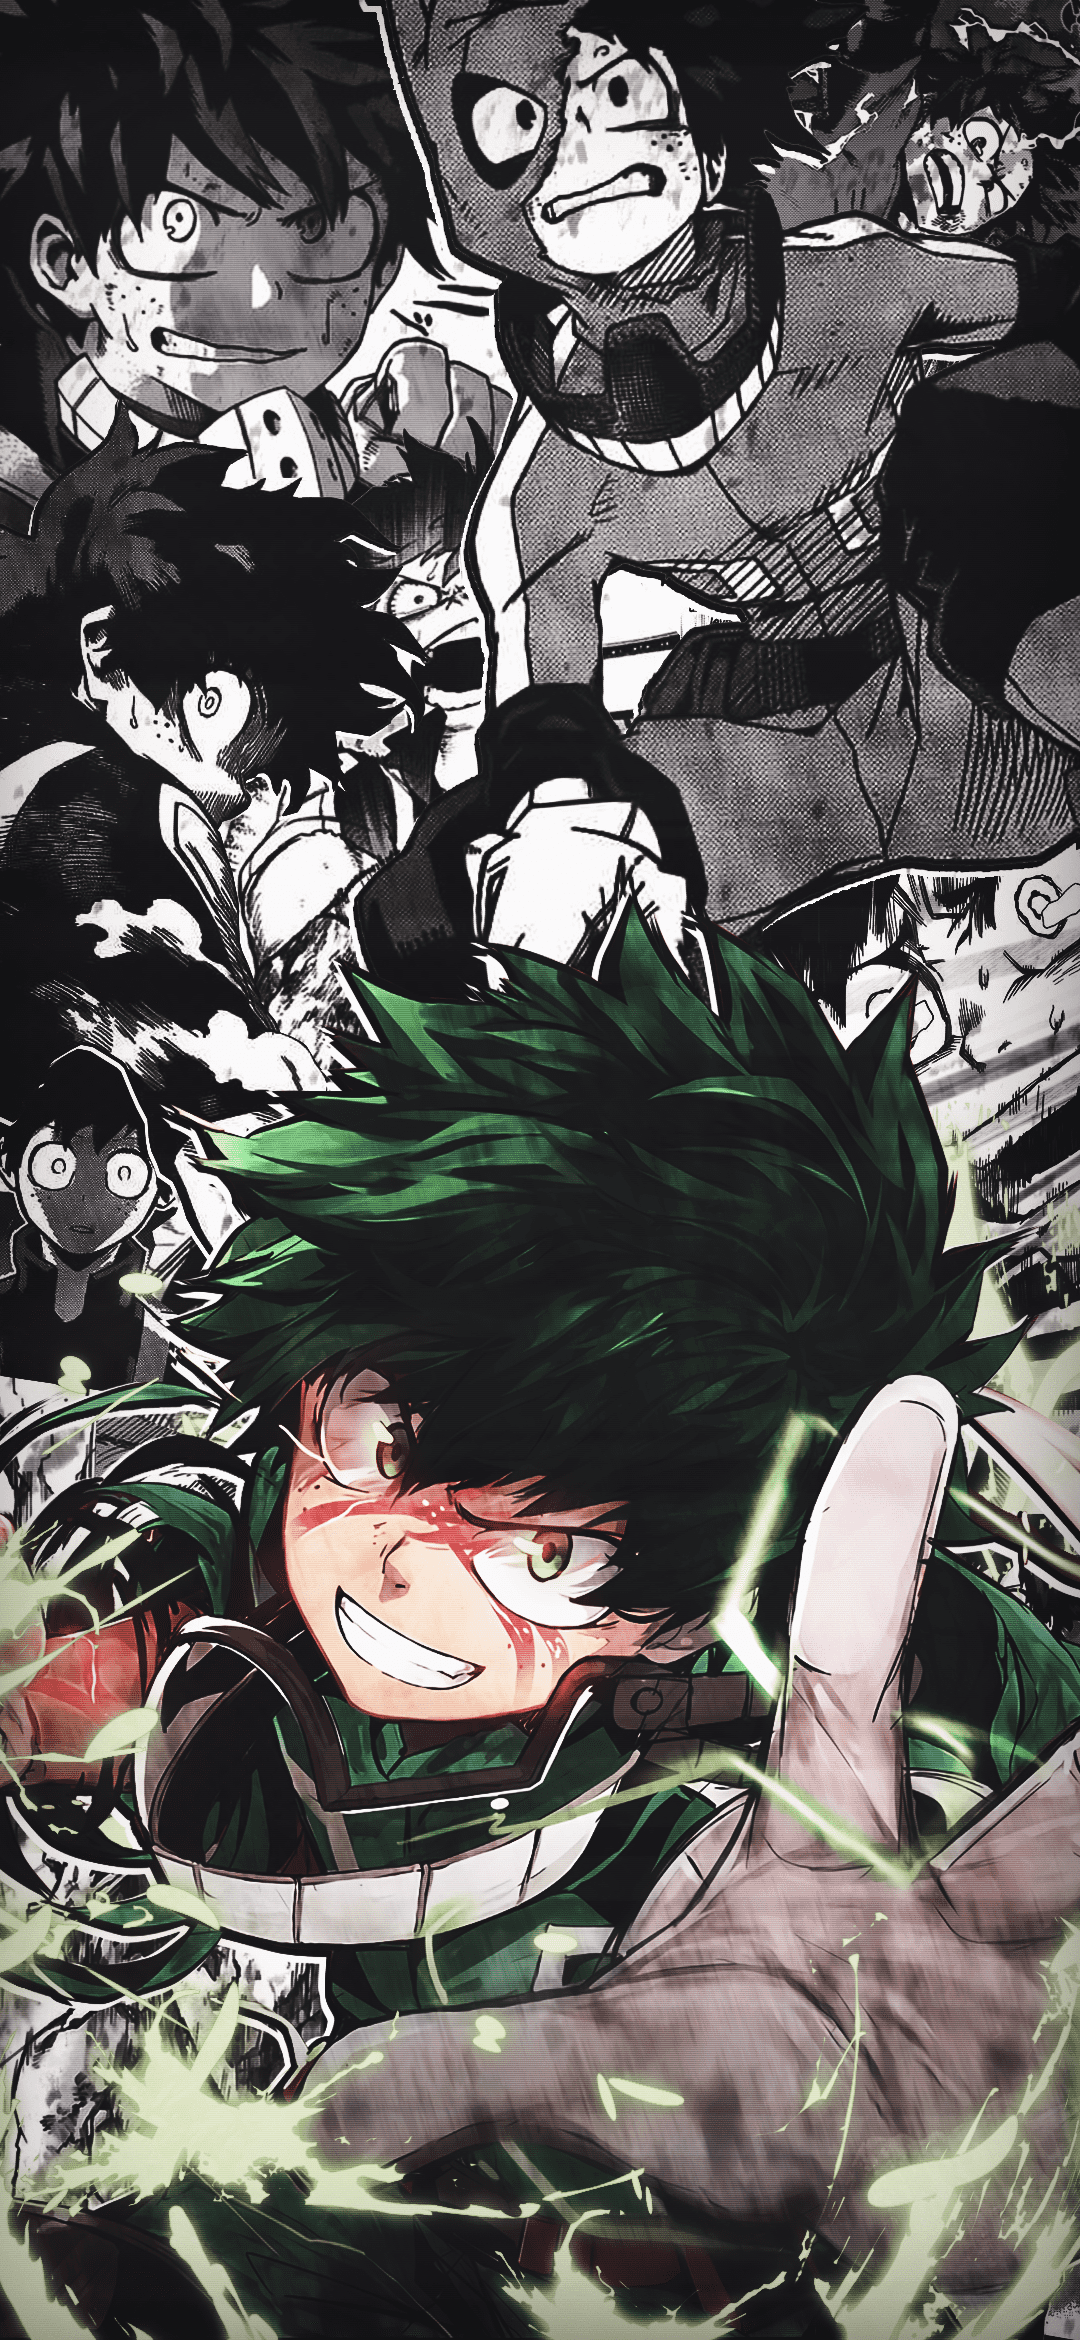 A poster of anime characters with green hair - My Hero Academia